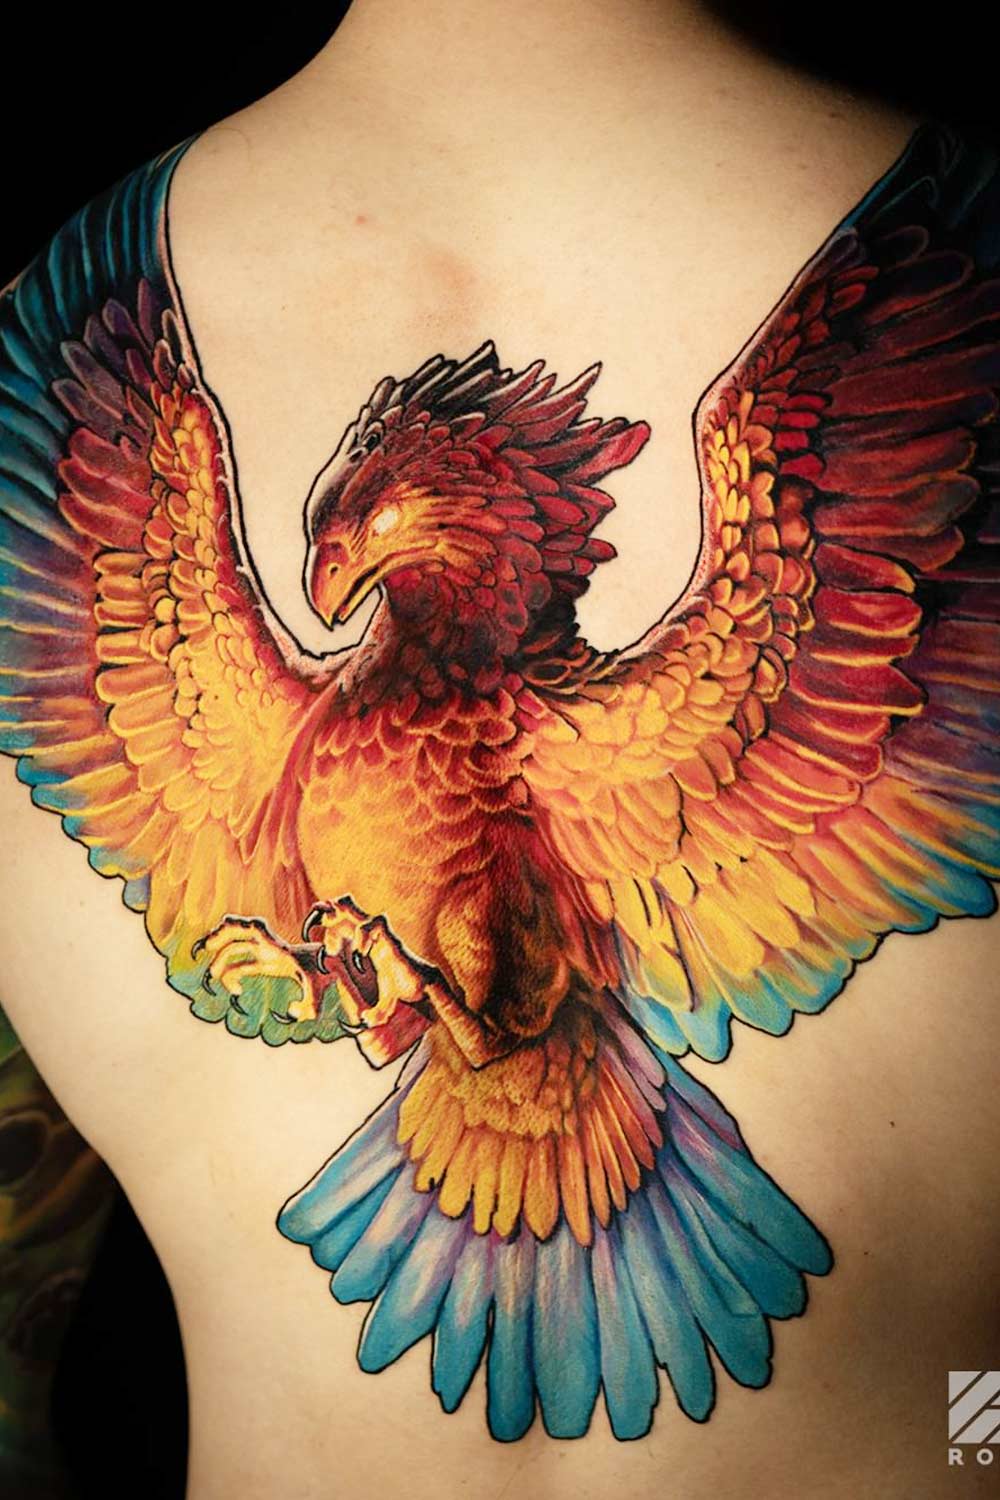 Phoenix Tattoo My client brought me a design and asked for me to add color  and make the piece watercolor... challenge accented. I thi... | Instagram